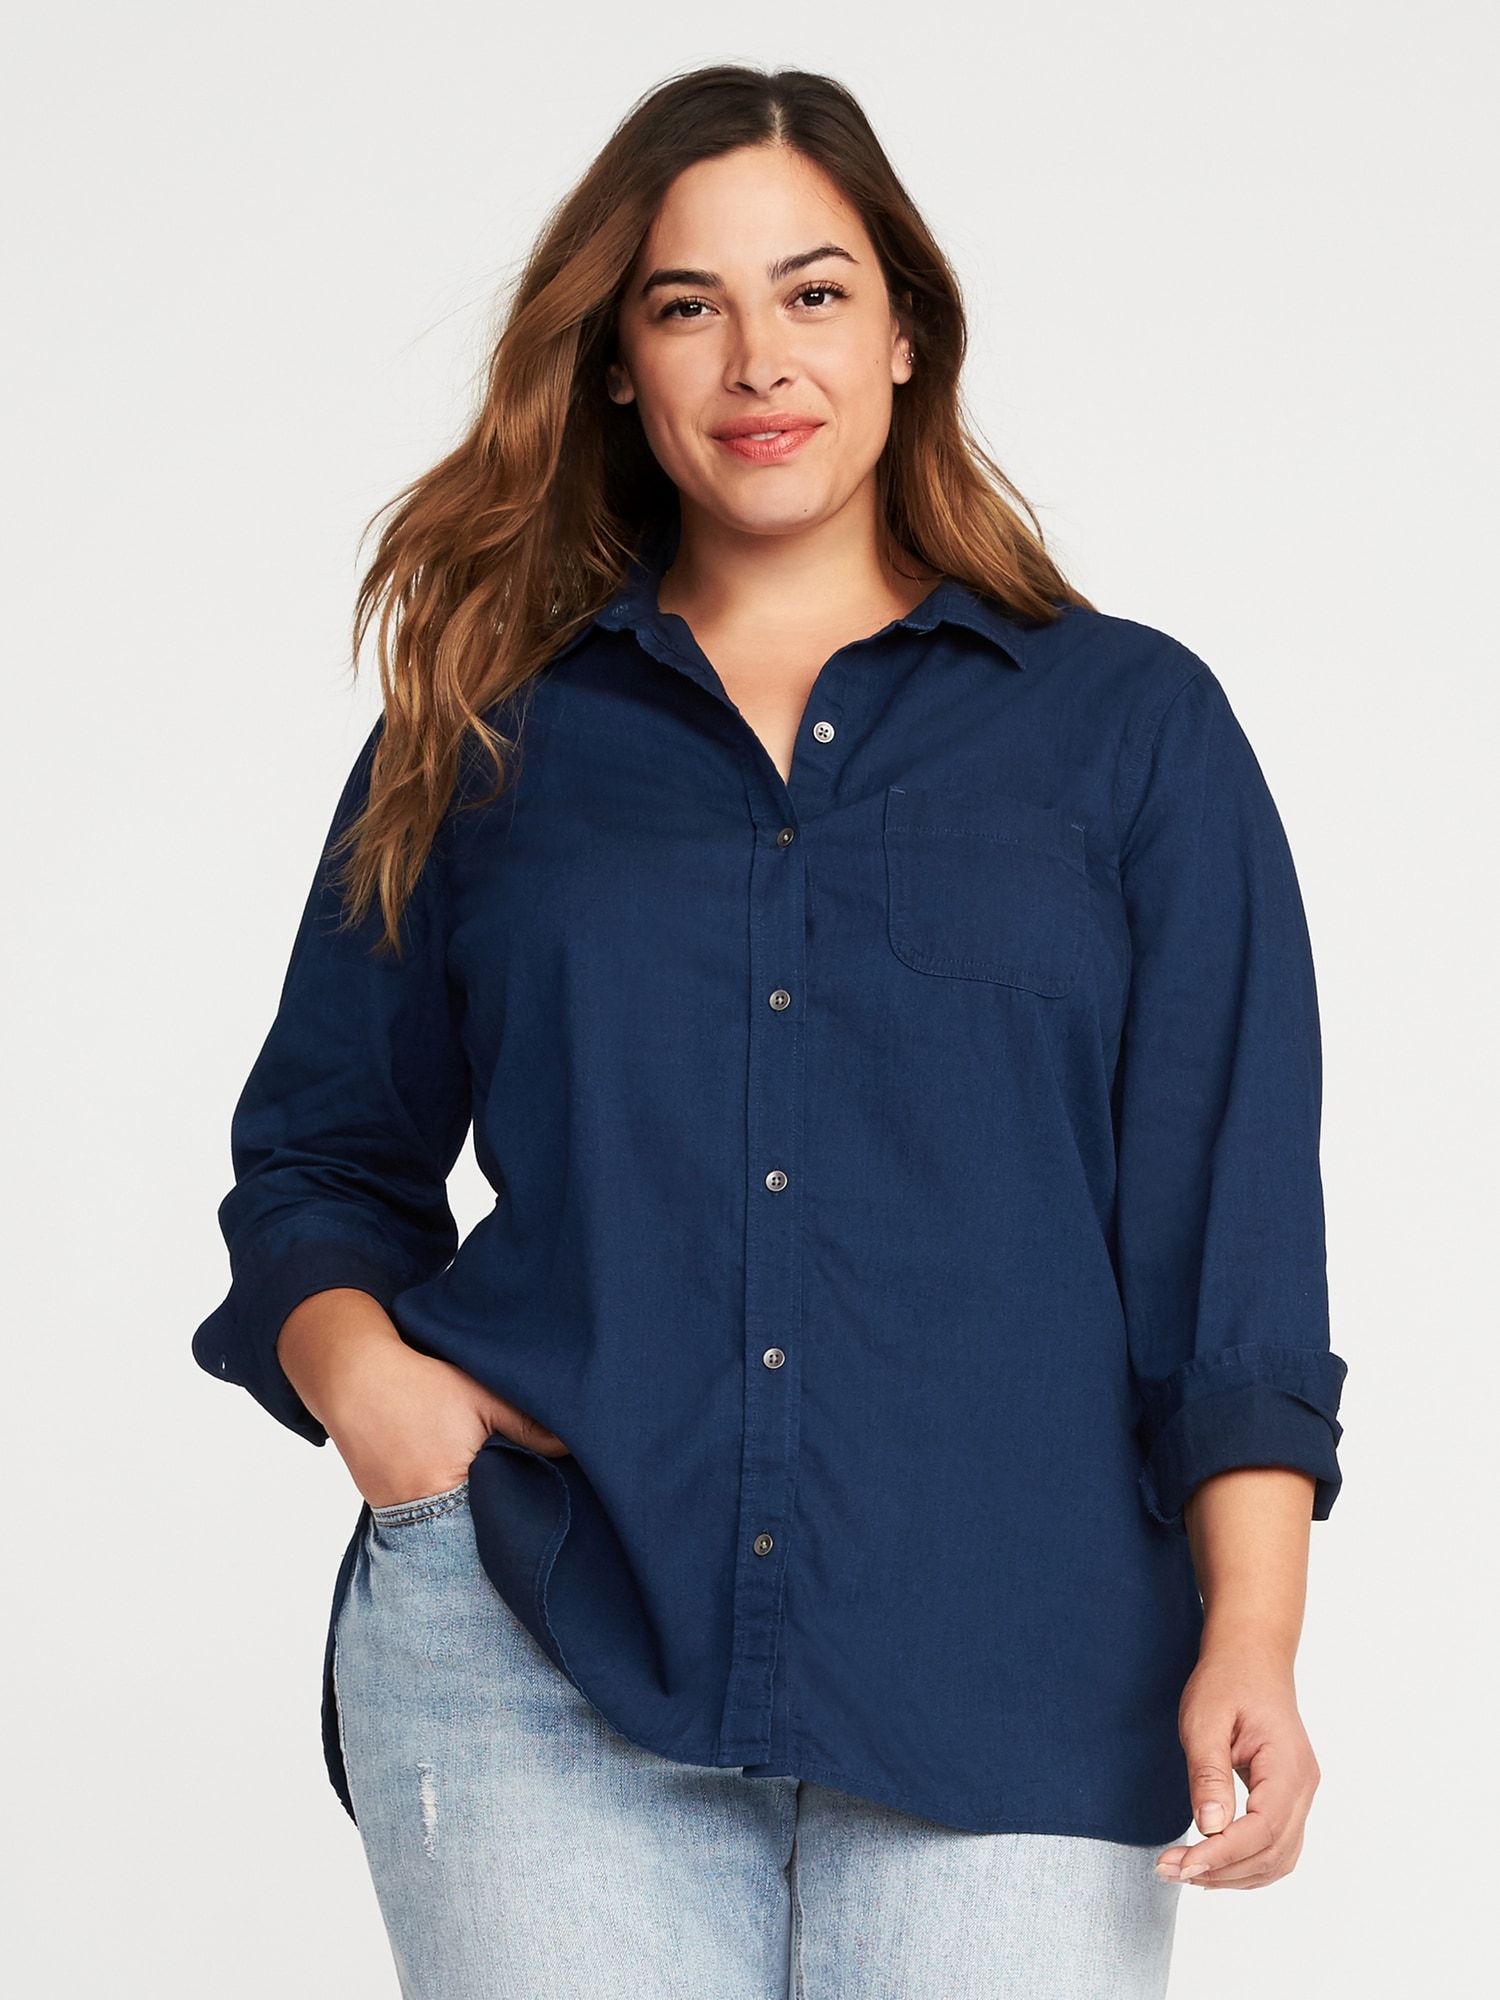 Classic Chambray Plus-Size Hi-Lo Shirt | Old Navy